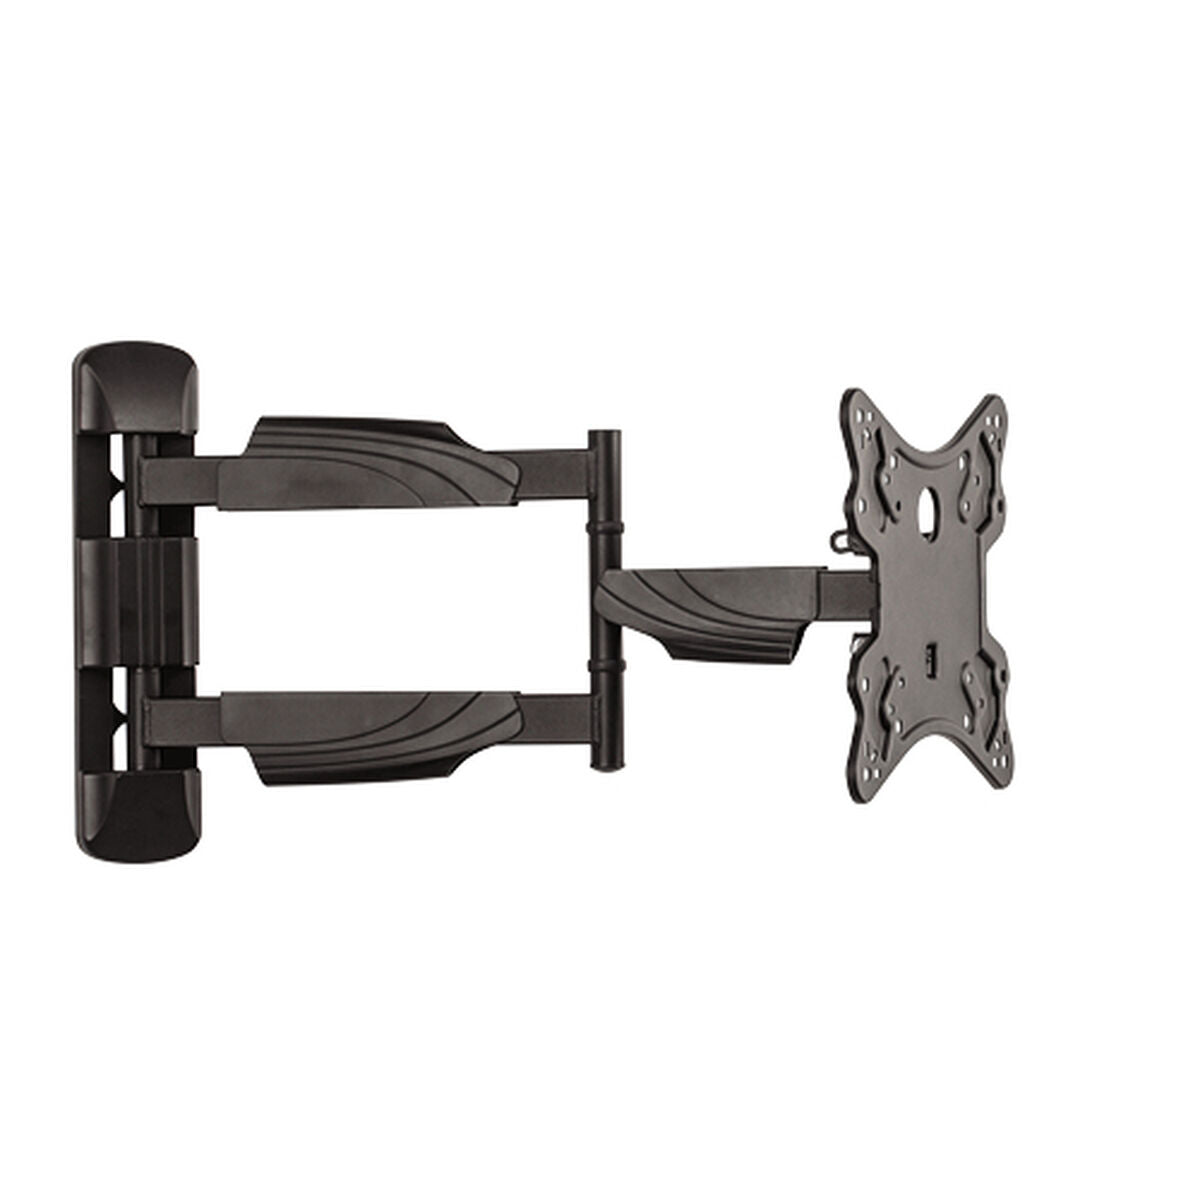 TV Wall Mount with Arm Fellowes 8043601 55" 23" 35 kg